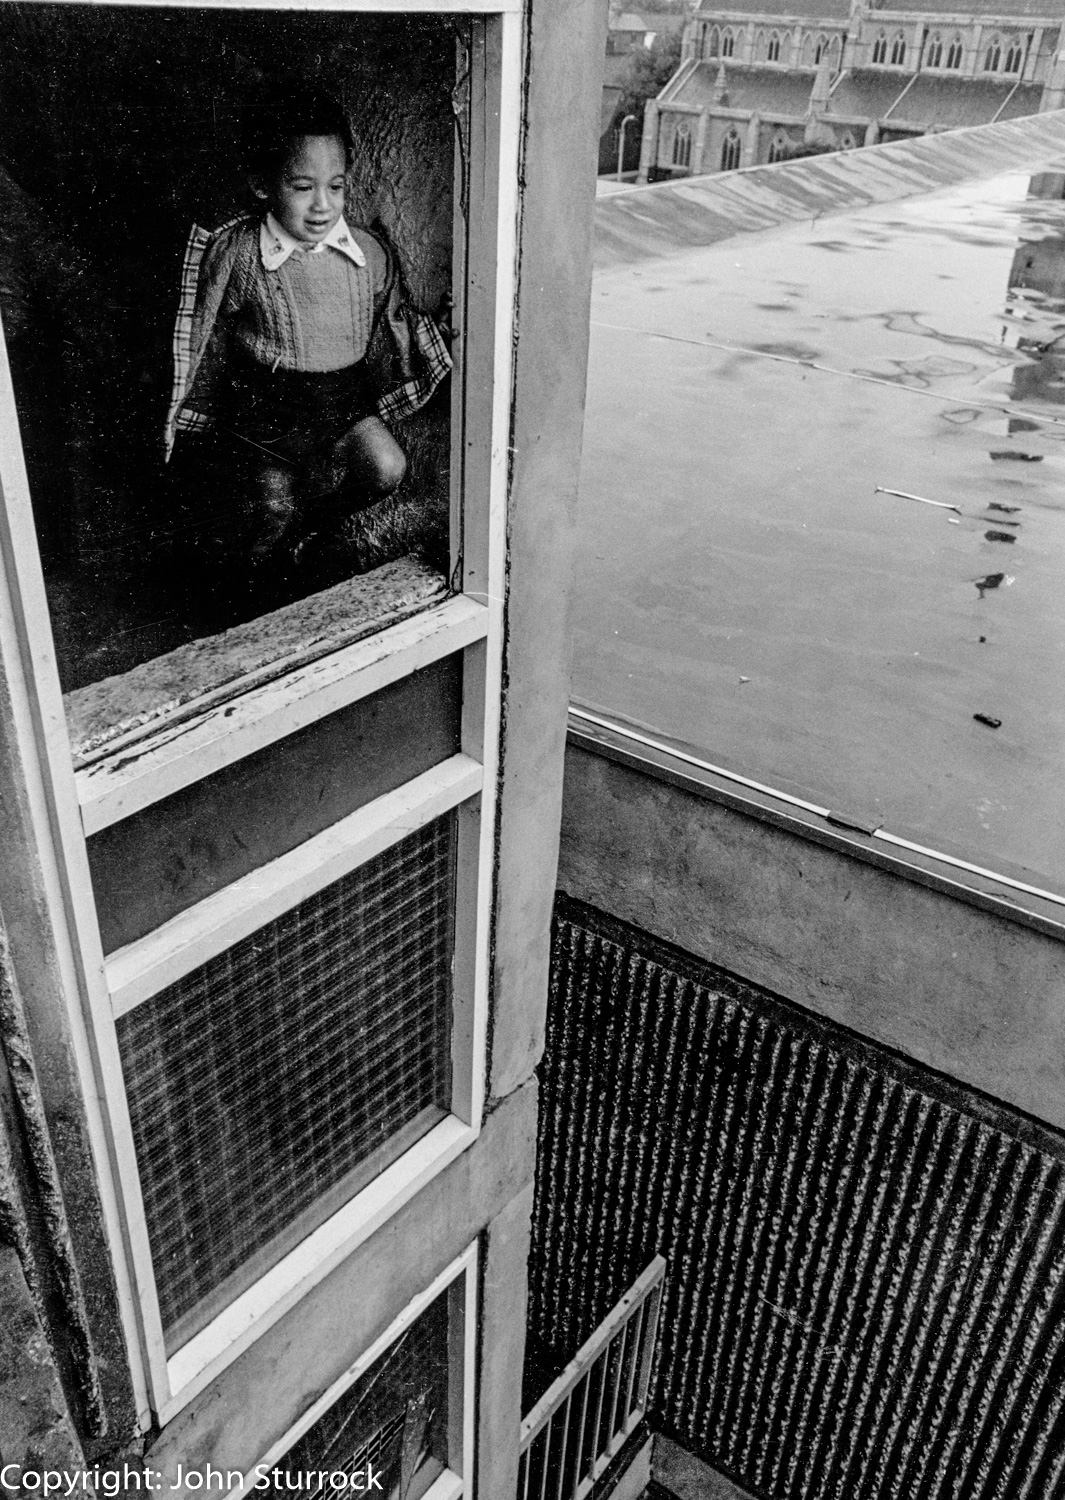  Dangerous stairwell in council flats, Moss Side, Manchester 1974 